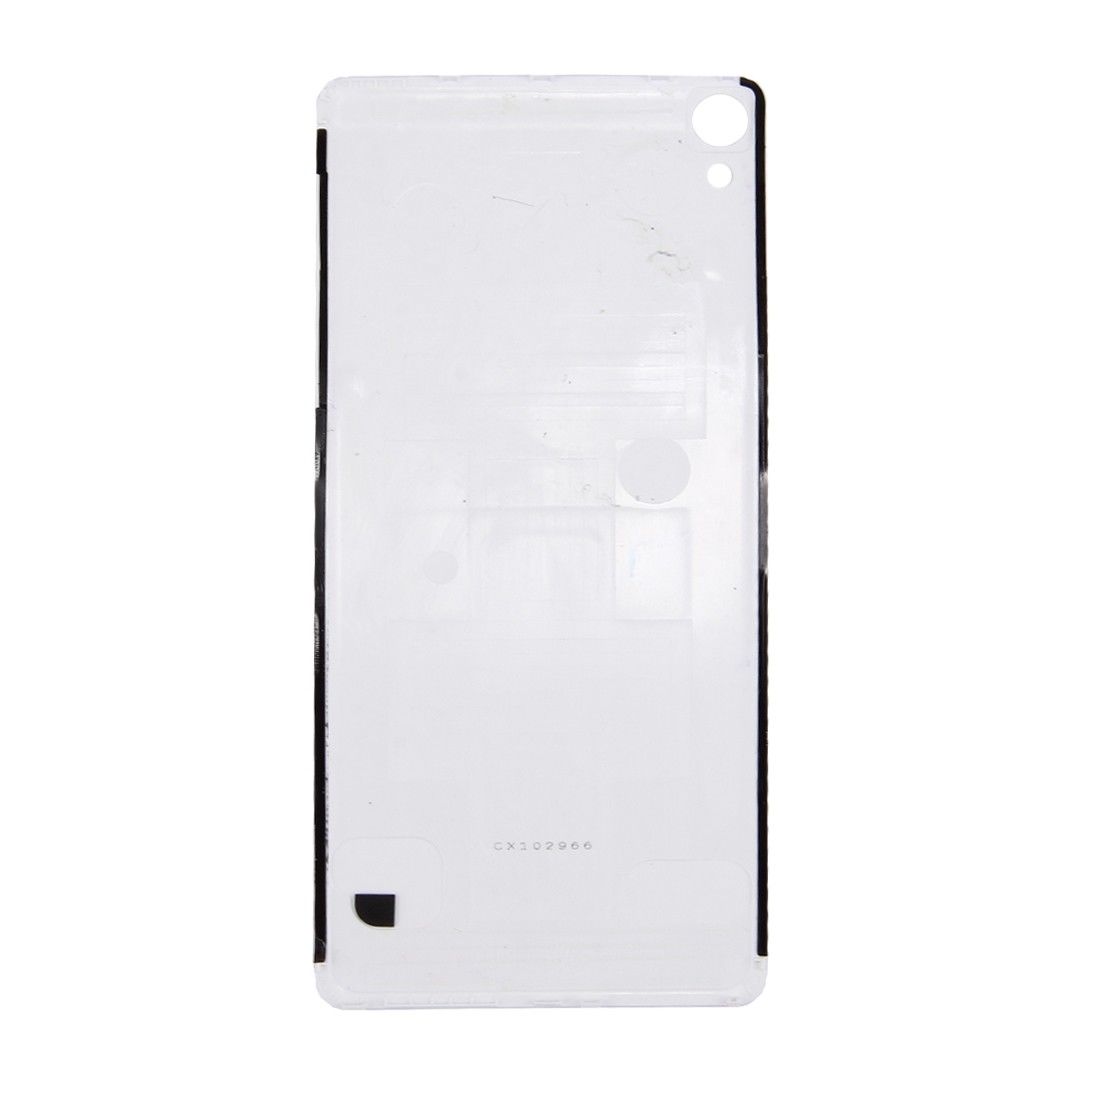 Sony Xperia XA Battery Cover Rear Panel White for [product_price] - First Help Tech